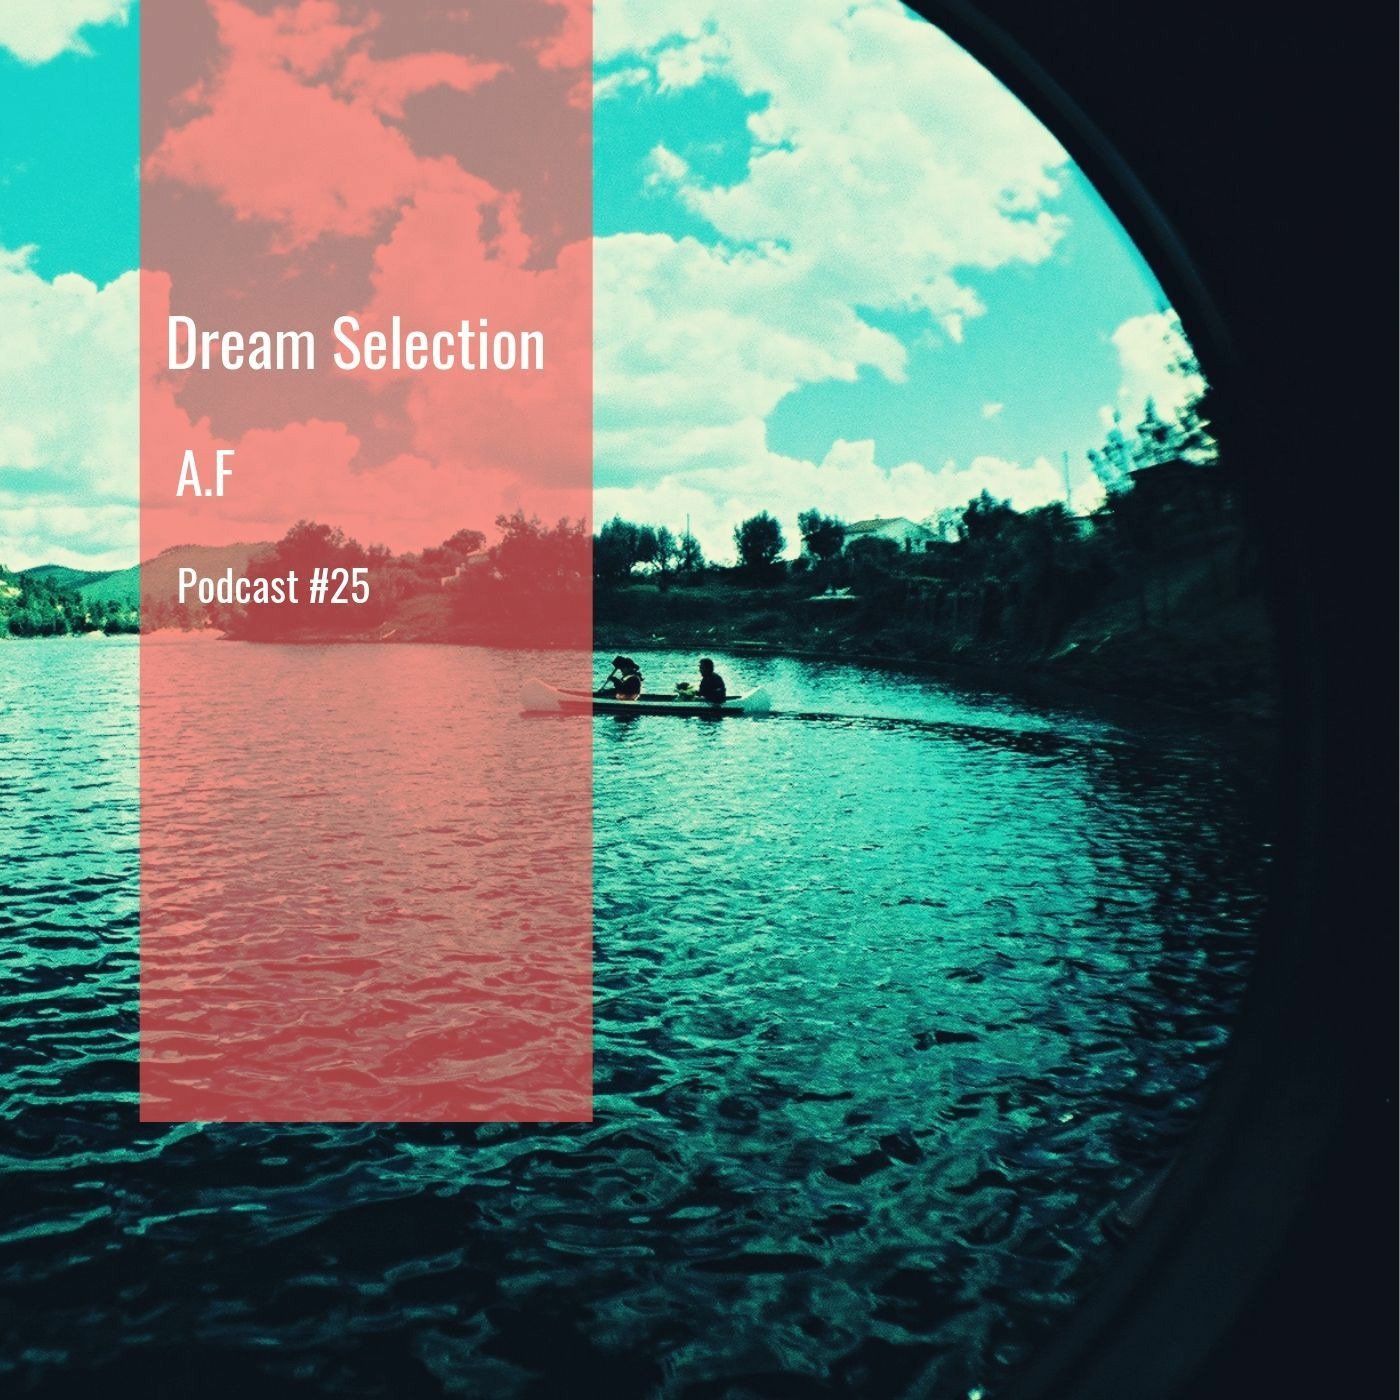 A.F - Dream Selection Podcast #25